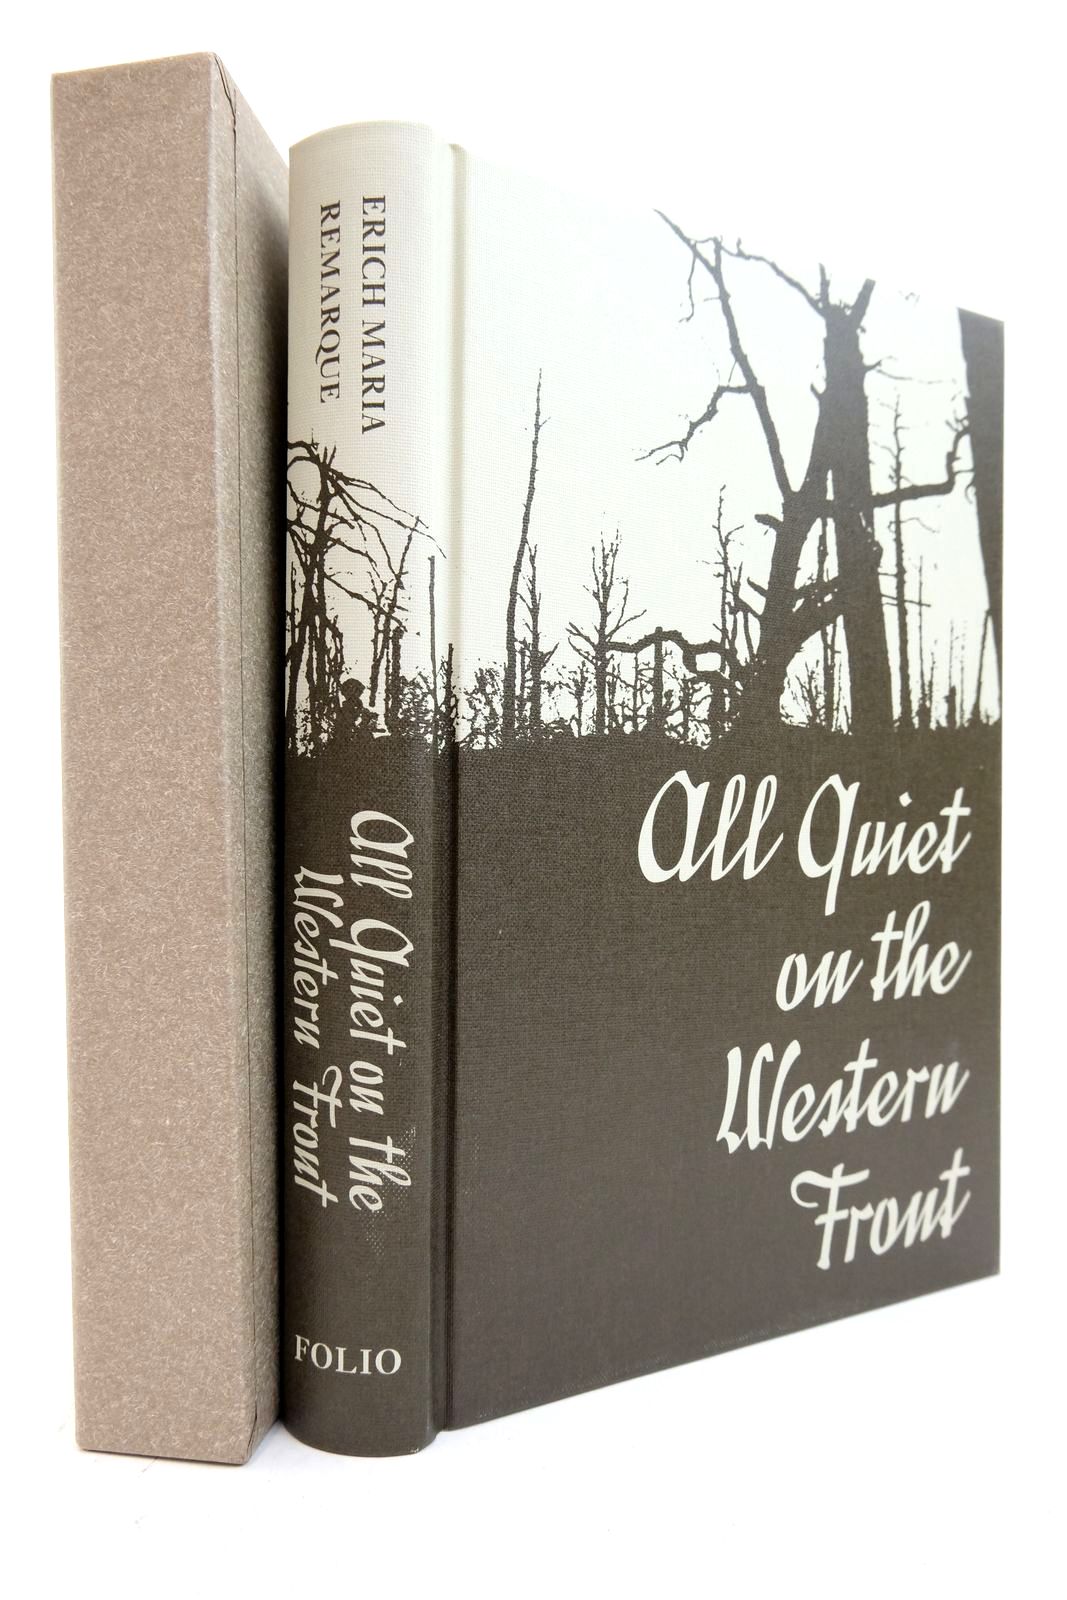 Photo of ALL QUIET ON THE WESTERN FRONT written by Remarque, Erich Maria Murdoch, Brian published by Folio Society (STOCK CODE: 2139448)  for sale by Stella & Rose's Books